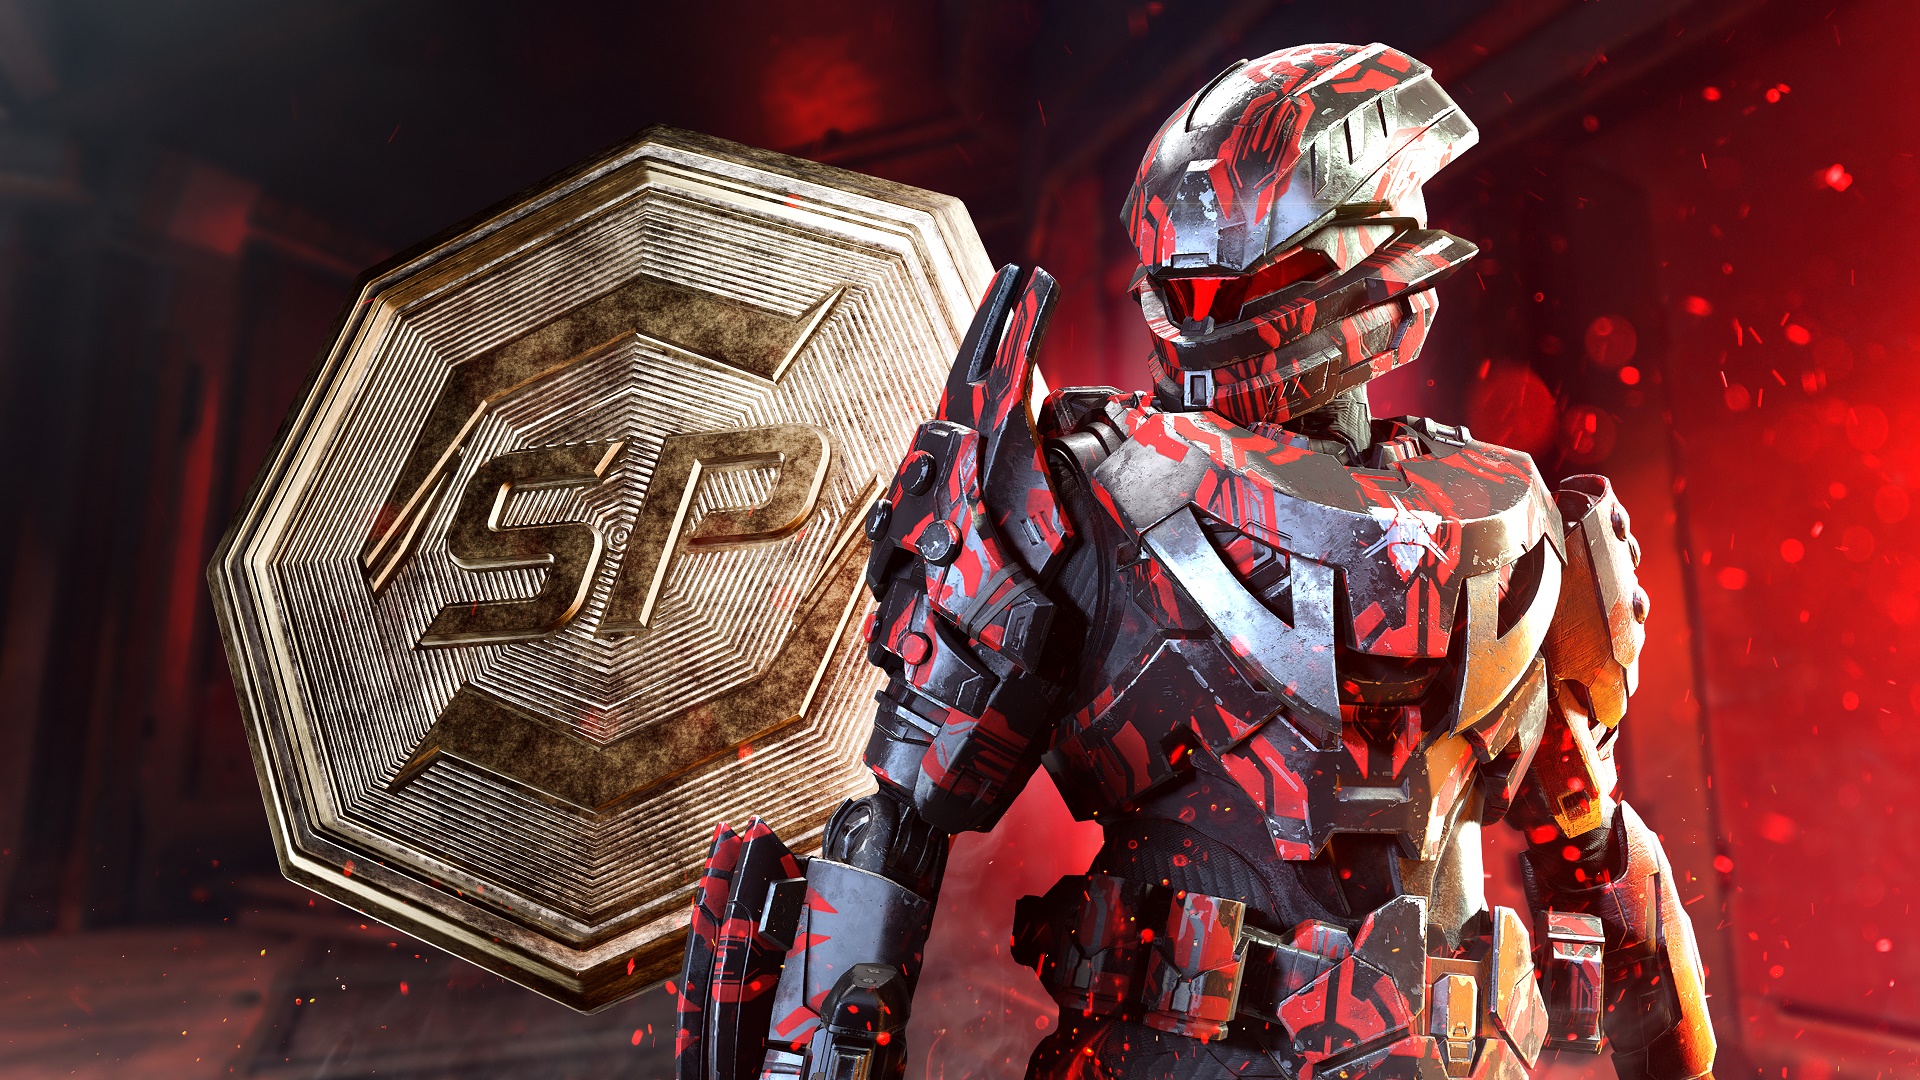 Halo Infinite image of a Spartan outfitted in Banished-themed armor next to a Spartan Point "coin"